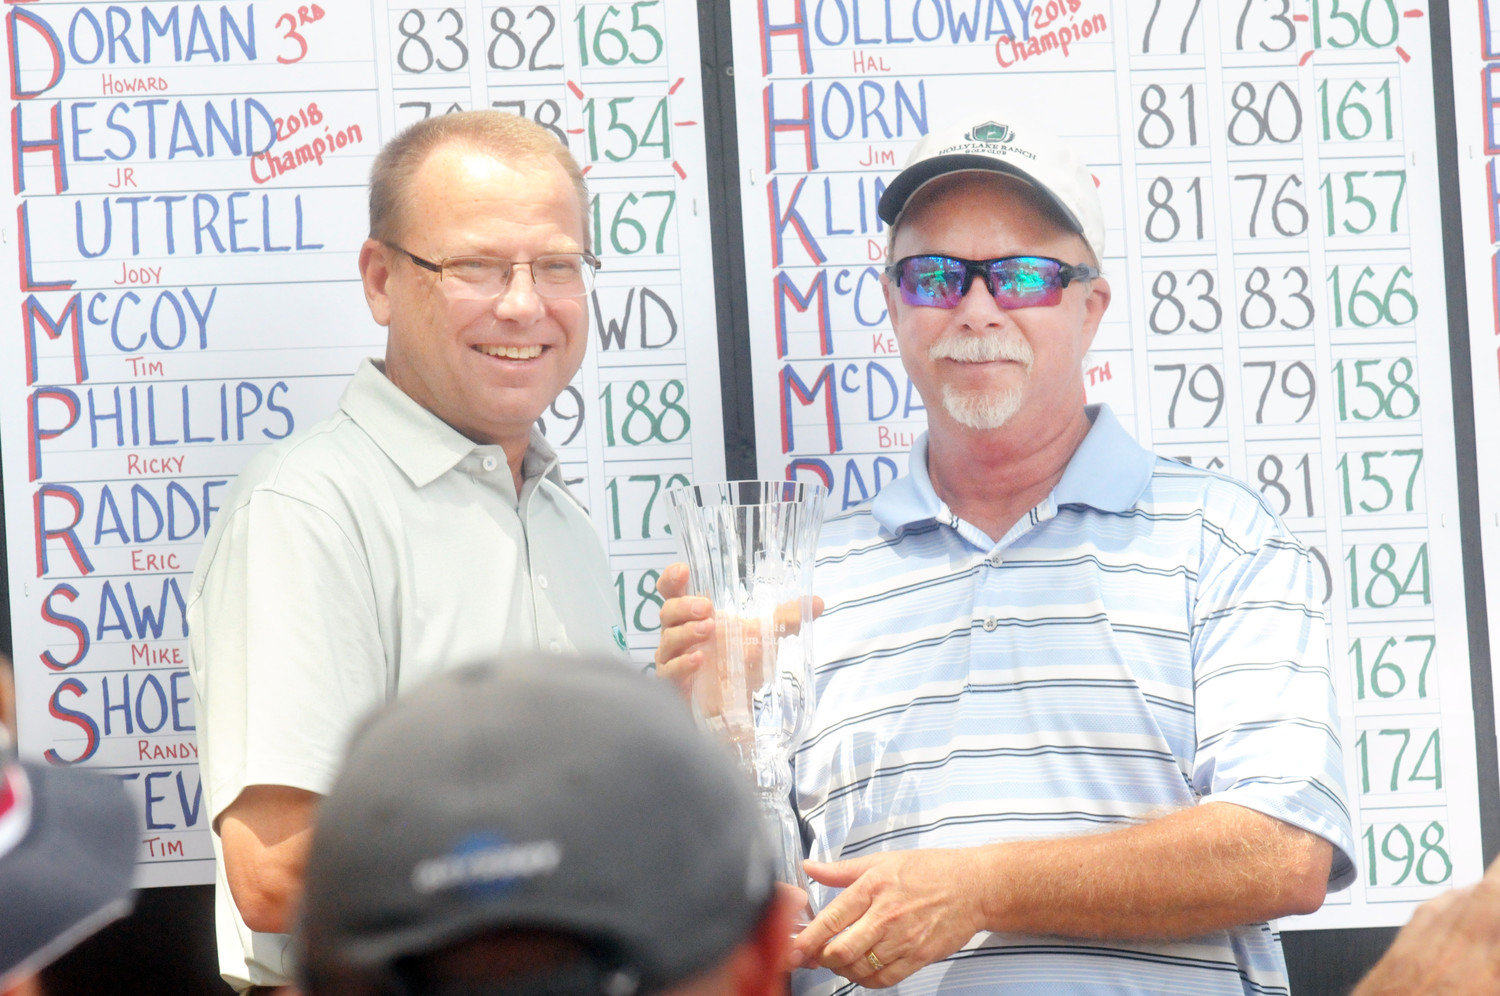 Holly Lake’s Jeff Wilson presents Club Champion J. R. Hestand his trophy after Hestand won his third club championship with rounds of 76 and 78 for a two-day-total of 154.